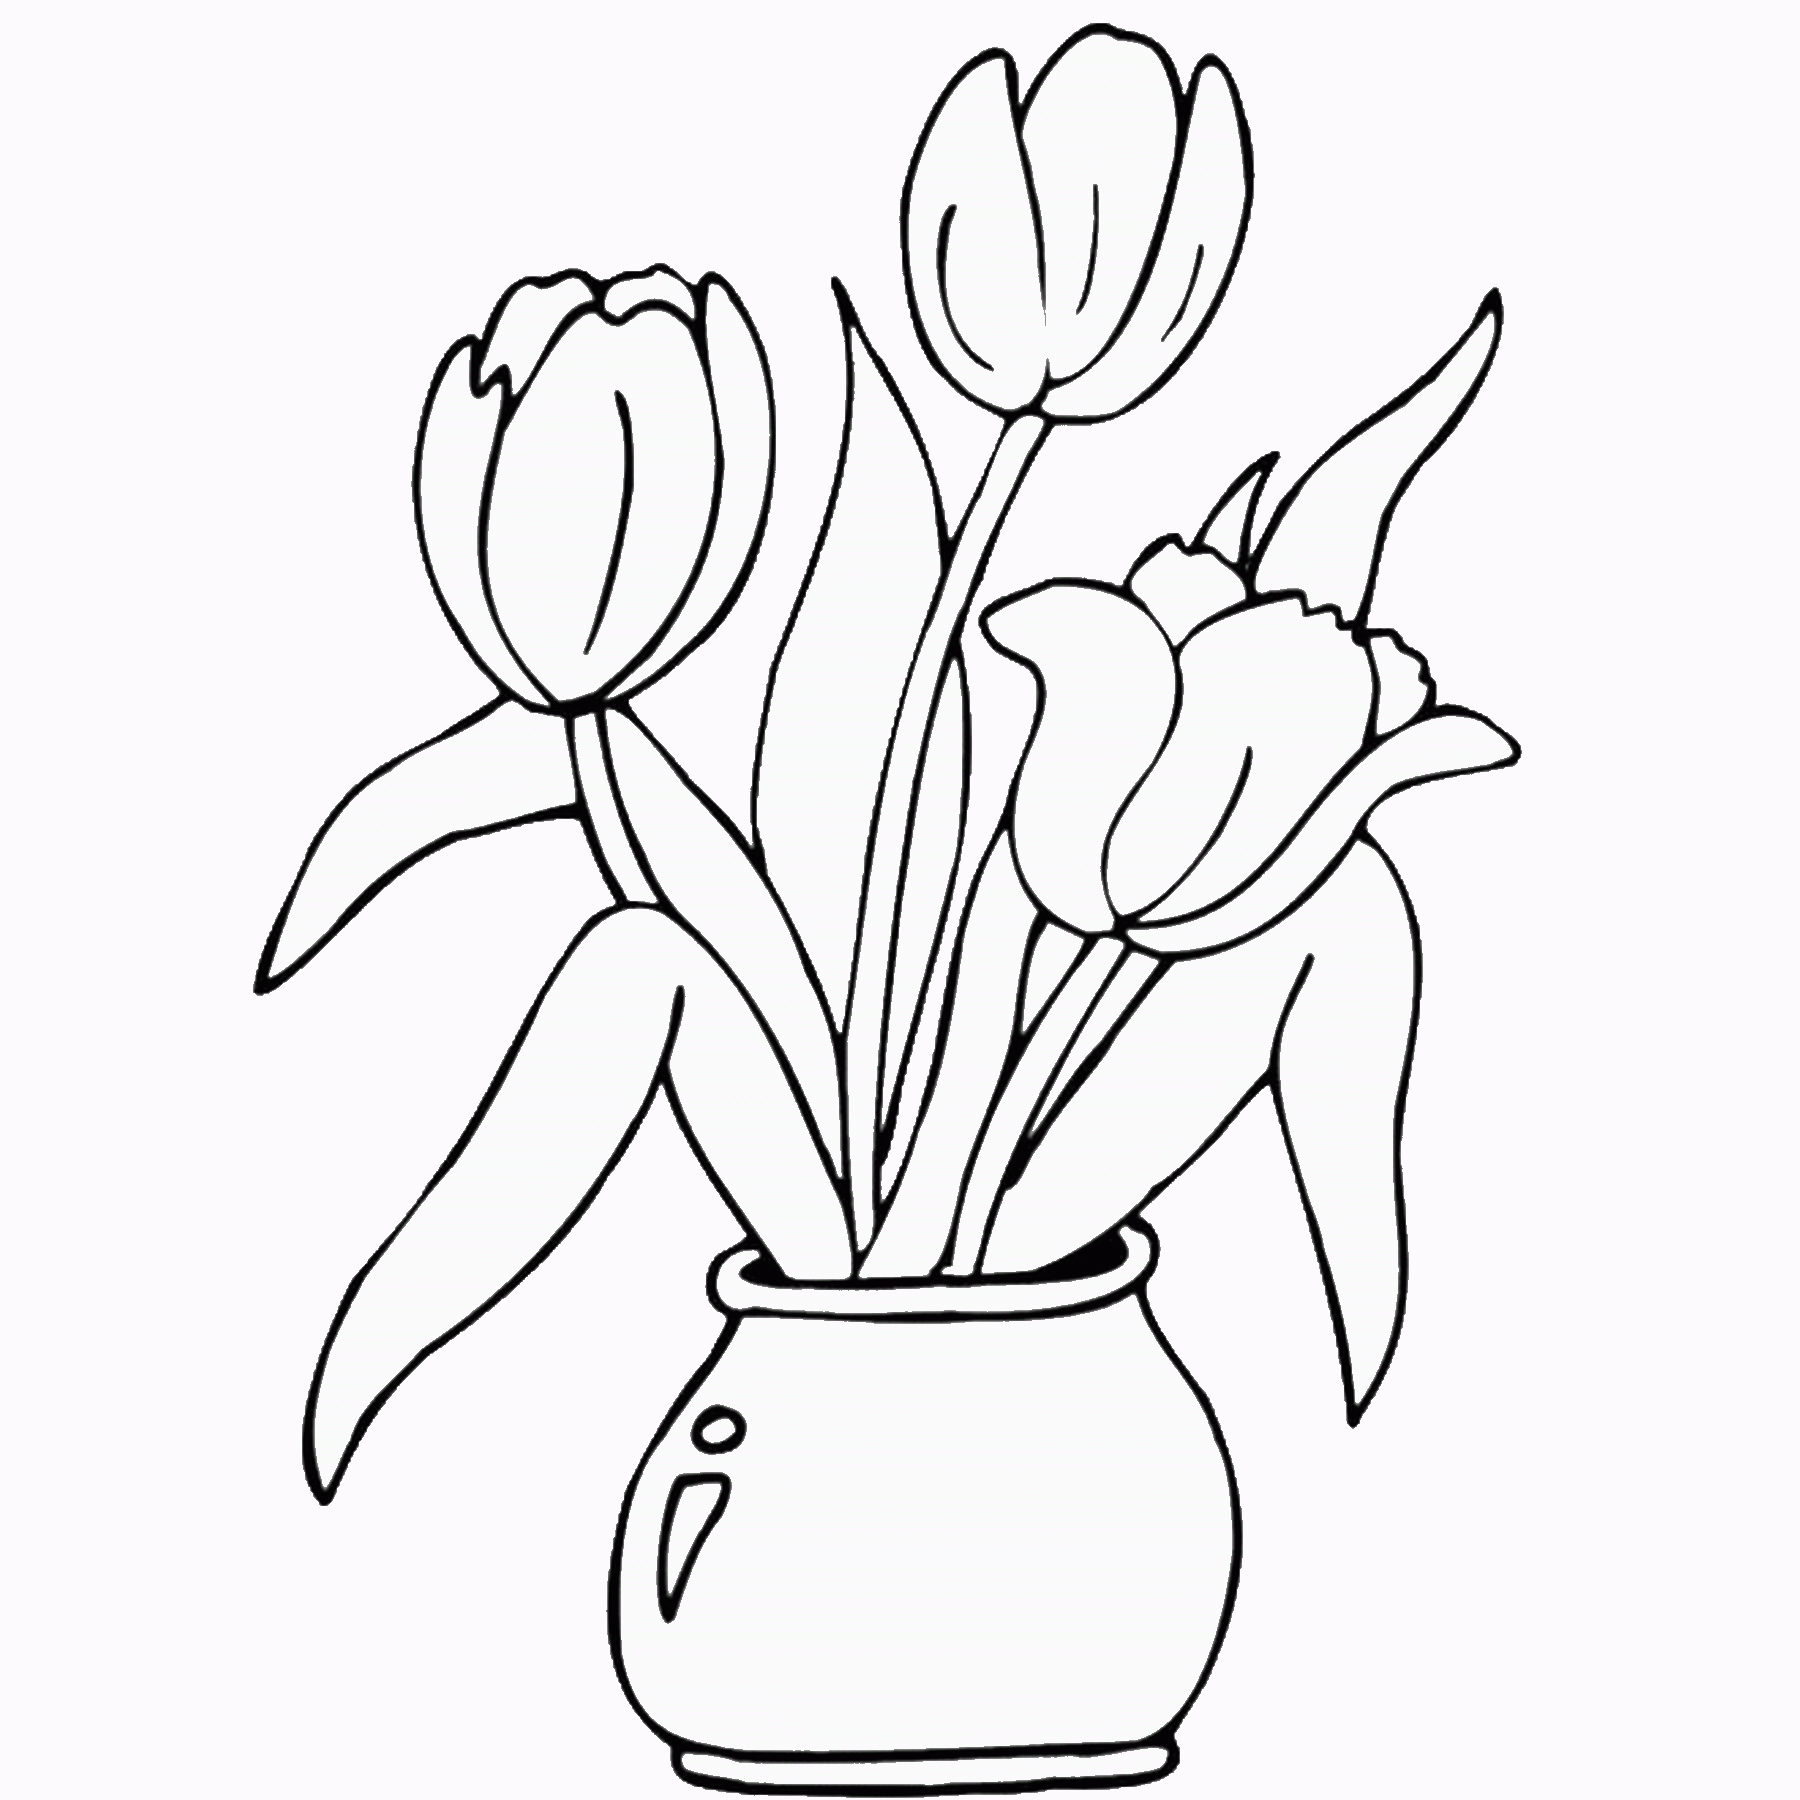 Printable Flower Coloring Pages Flowers Nature flowerc61 Printable 2021 385 Coloring4free